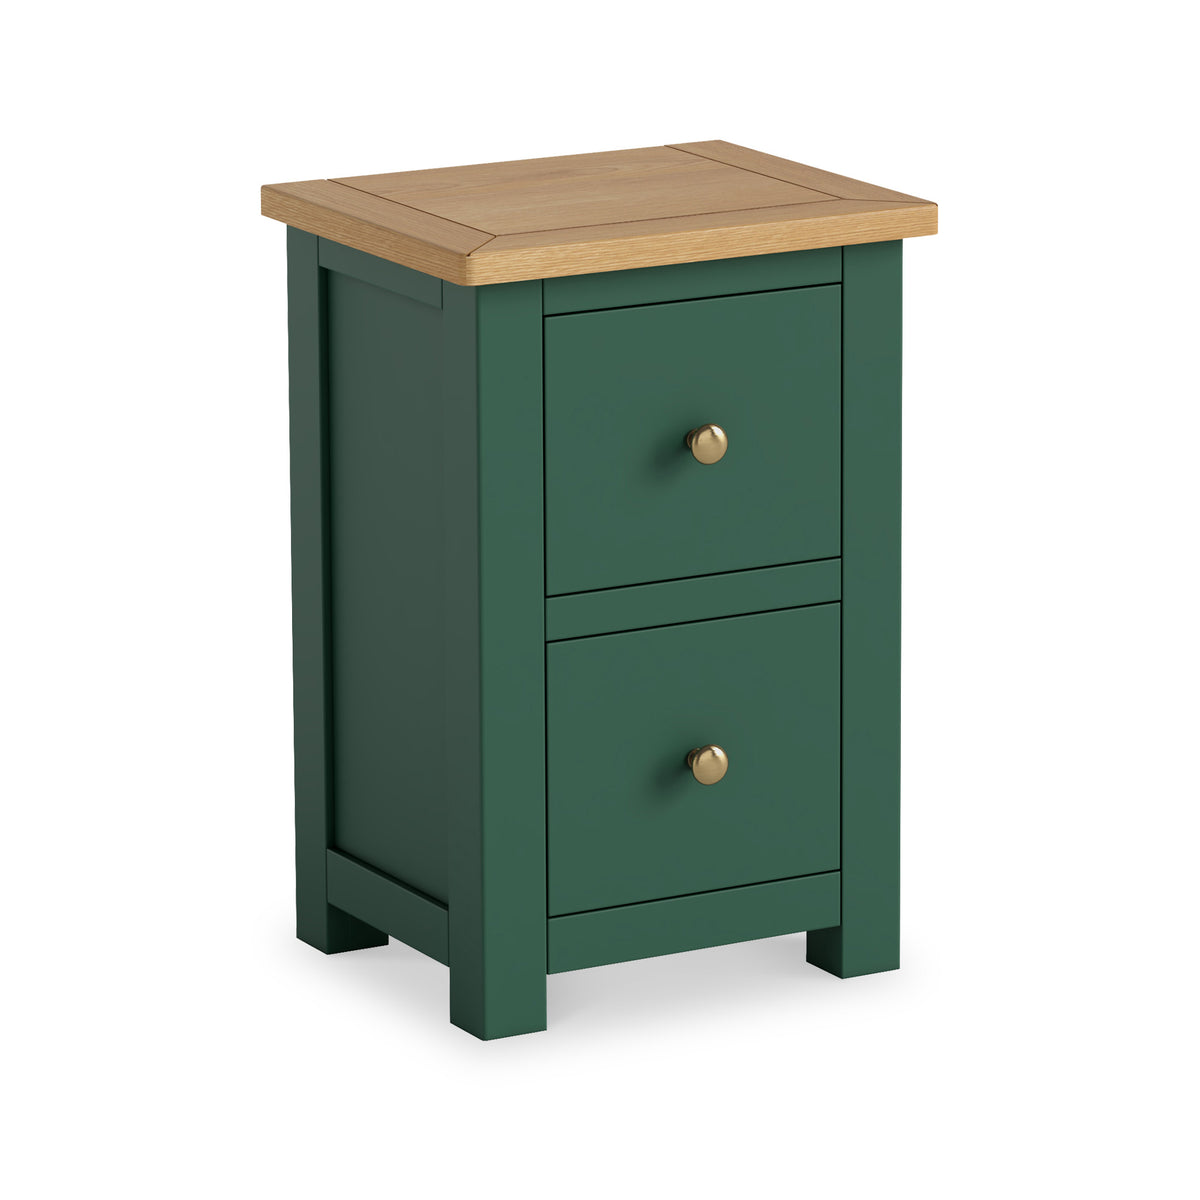 Duchy Puck Green 2 Drawer Bedside Table with Oak Top from Roseland Furniture